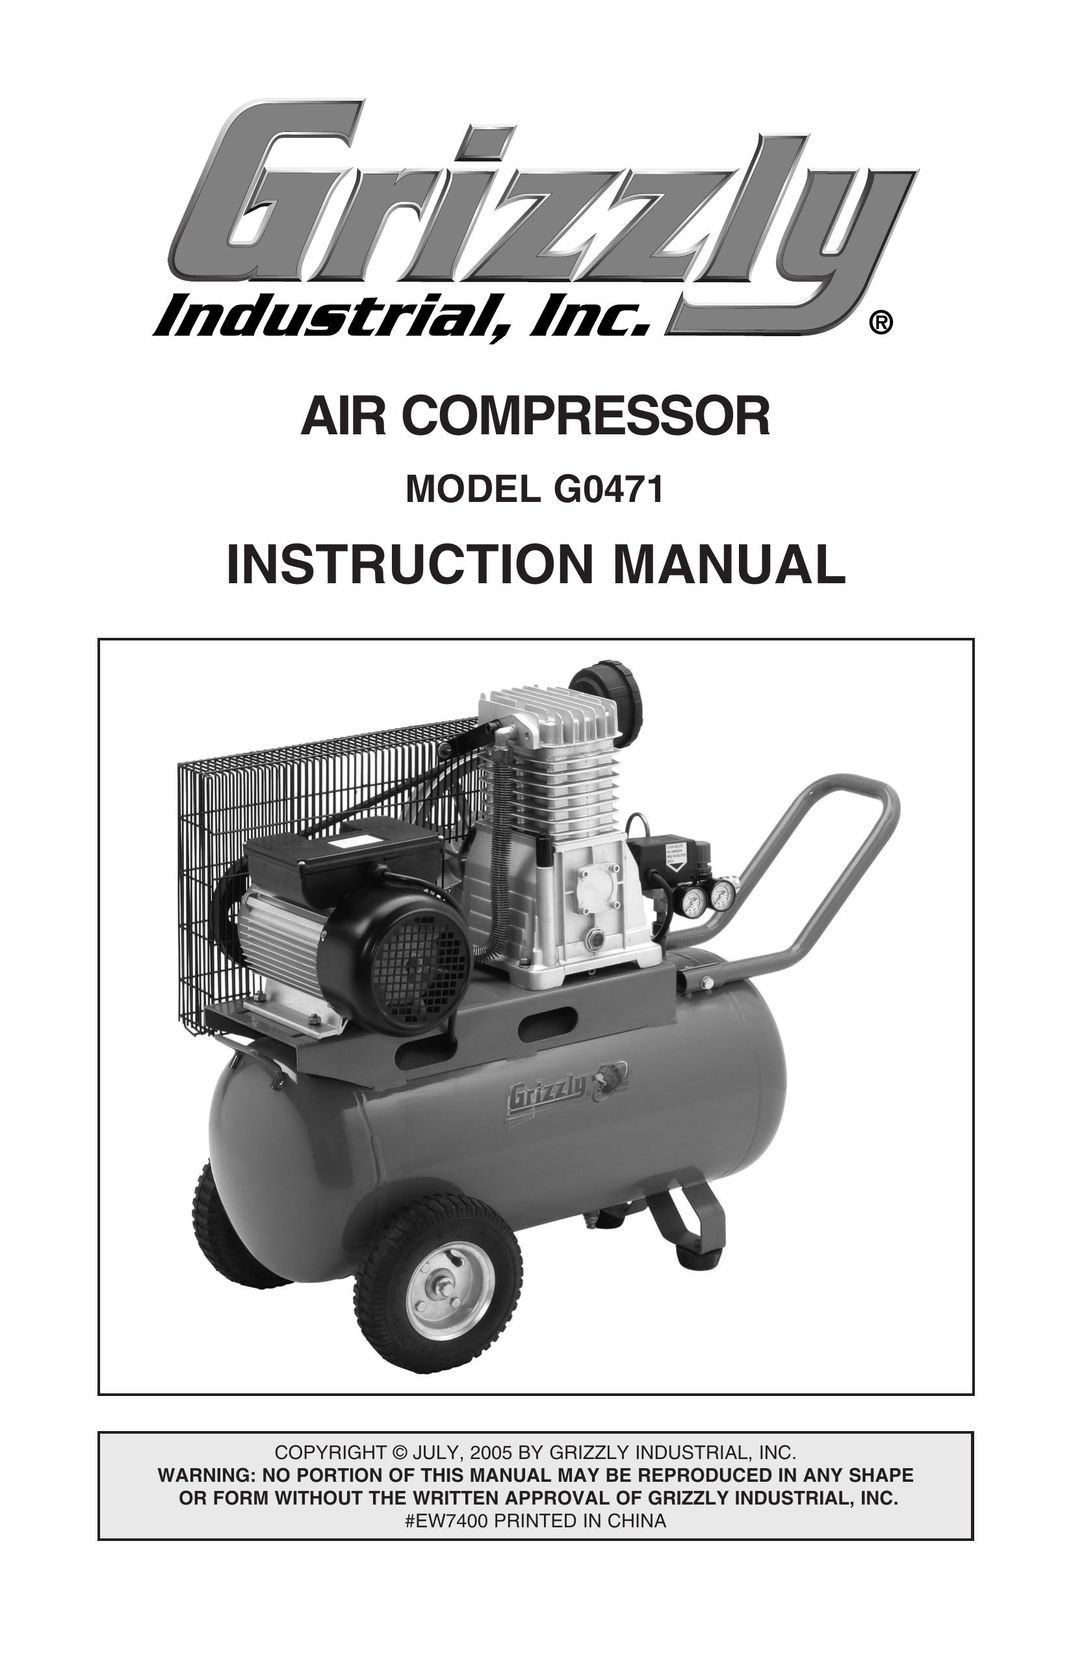 Grizzly G0471 Air Compressor User Manual